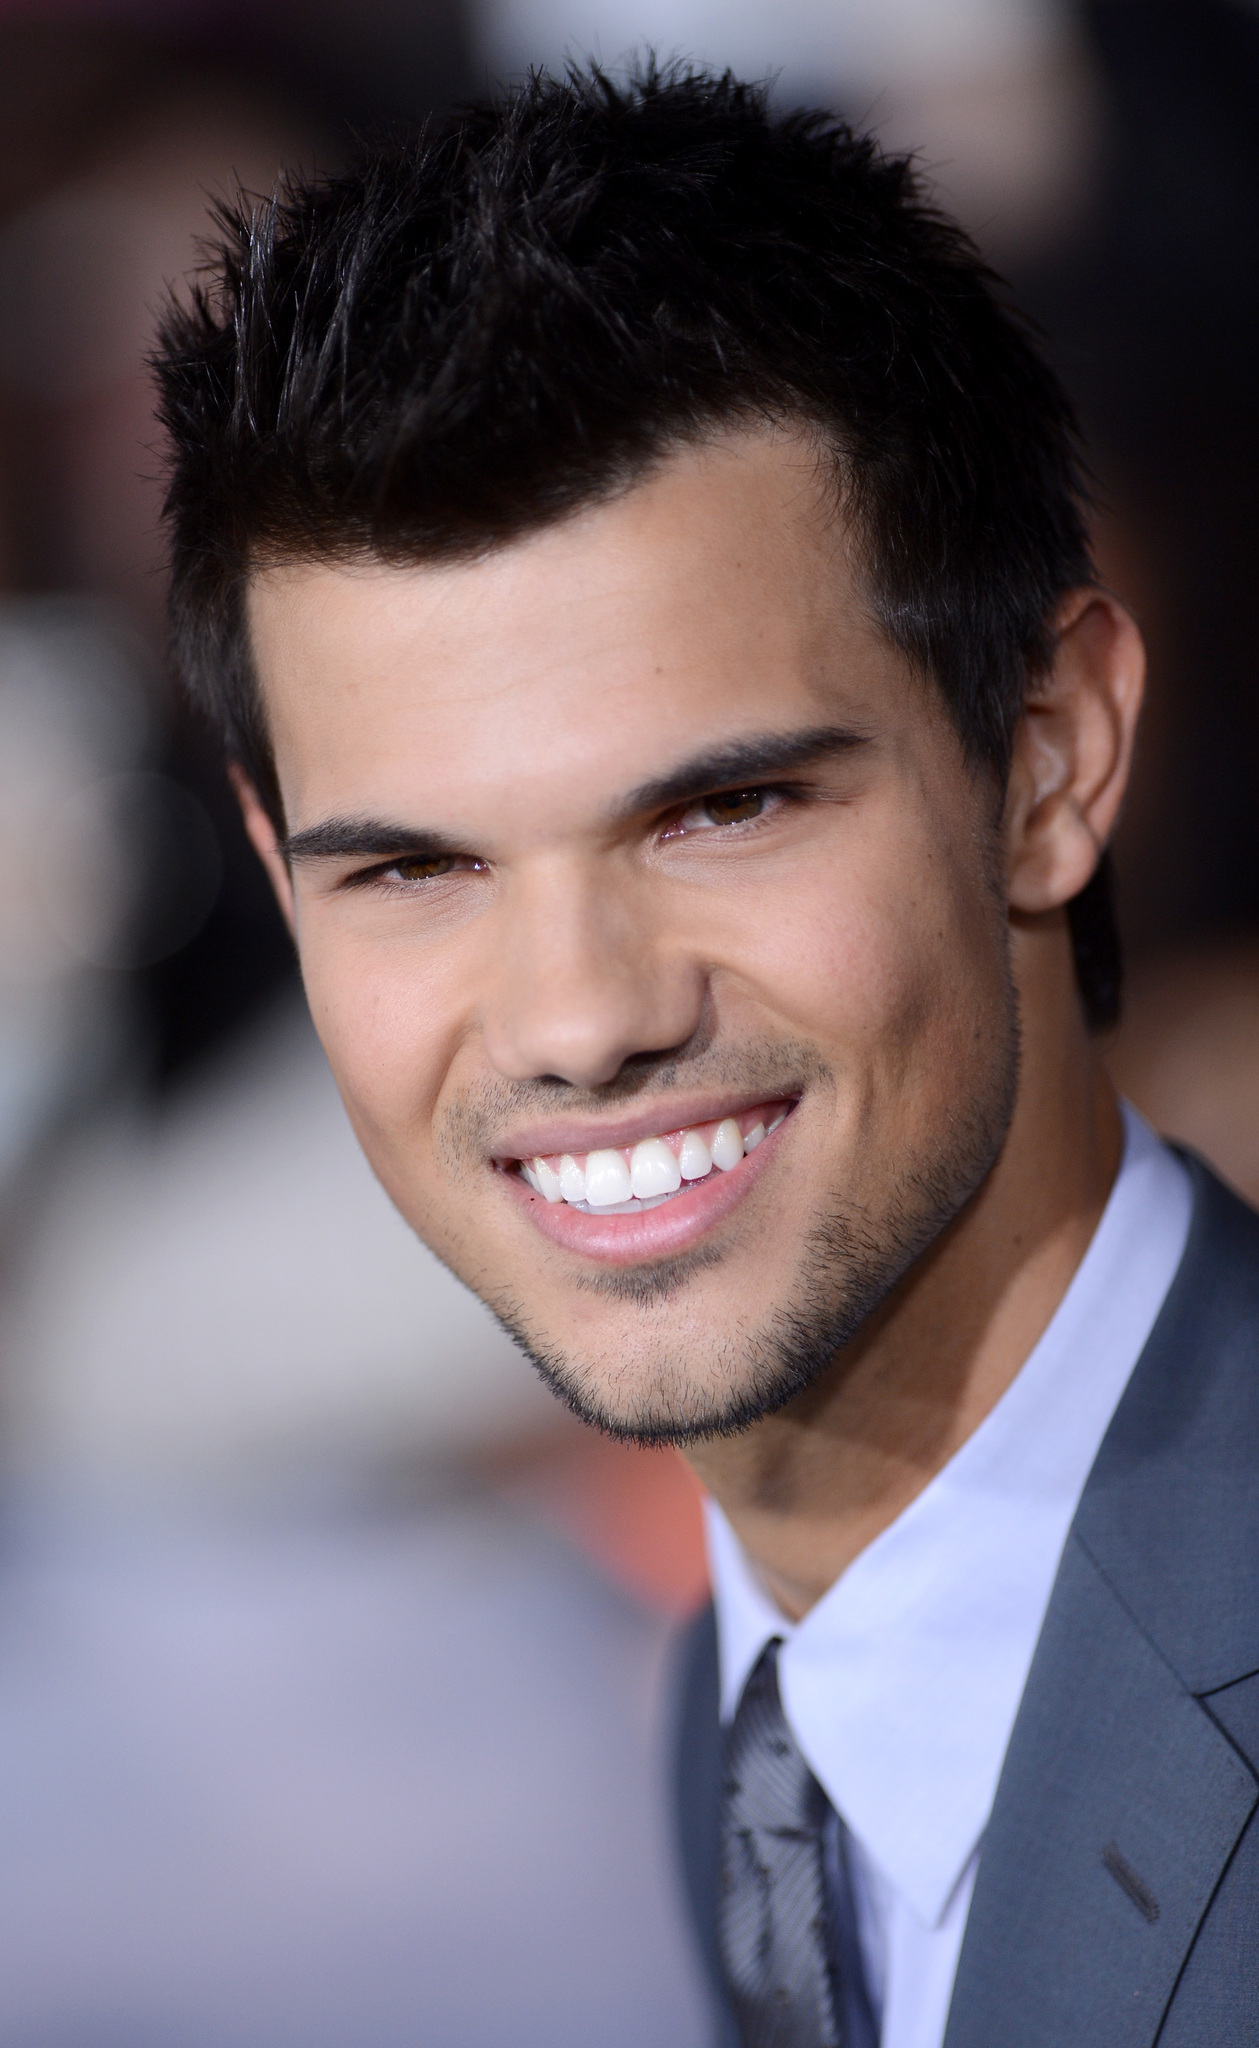 Wallpaper : face, long hair, brunette, black hair, supermodel, Taylor  Lautner, beauty, hairstyle, photo shoot, brown hair, hair coloring,  eyebrow, close up, forehead, brown eyed, fashion model 1920x1200 -  CoolWallpapers - 775778 - HD Wallpapers - WallHere